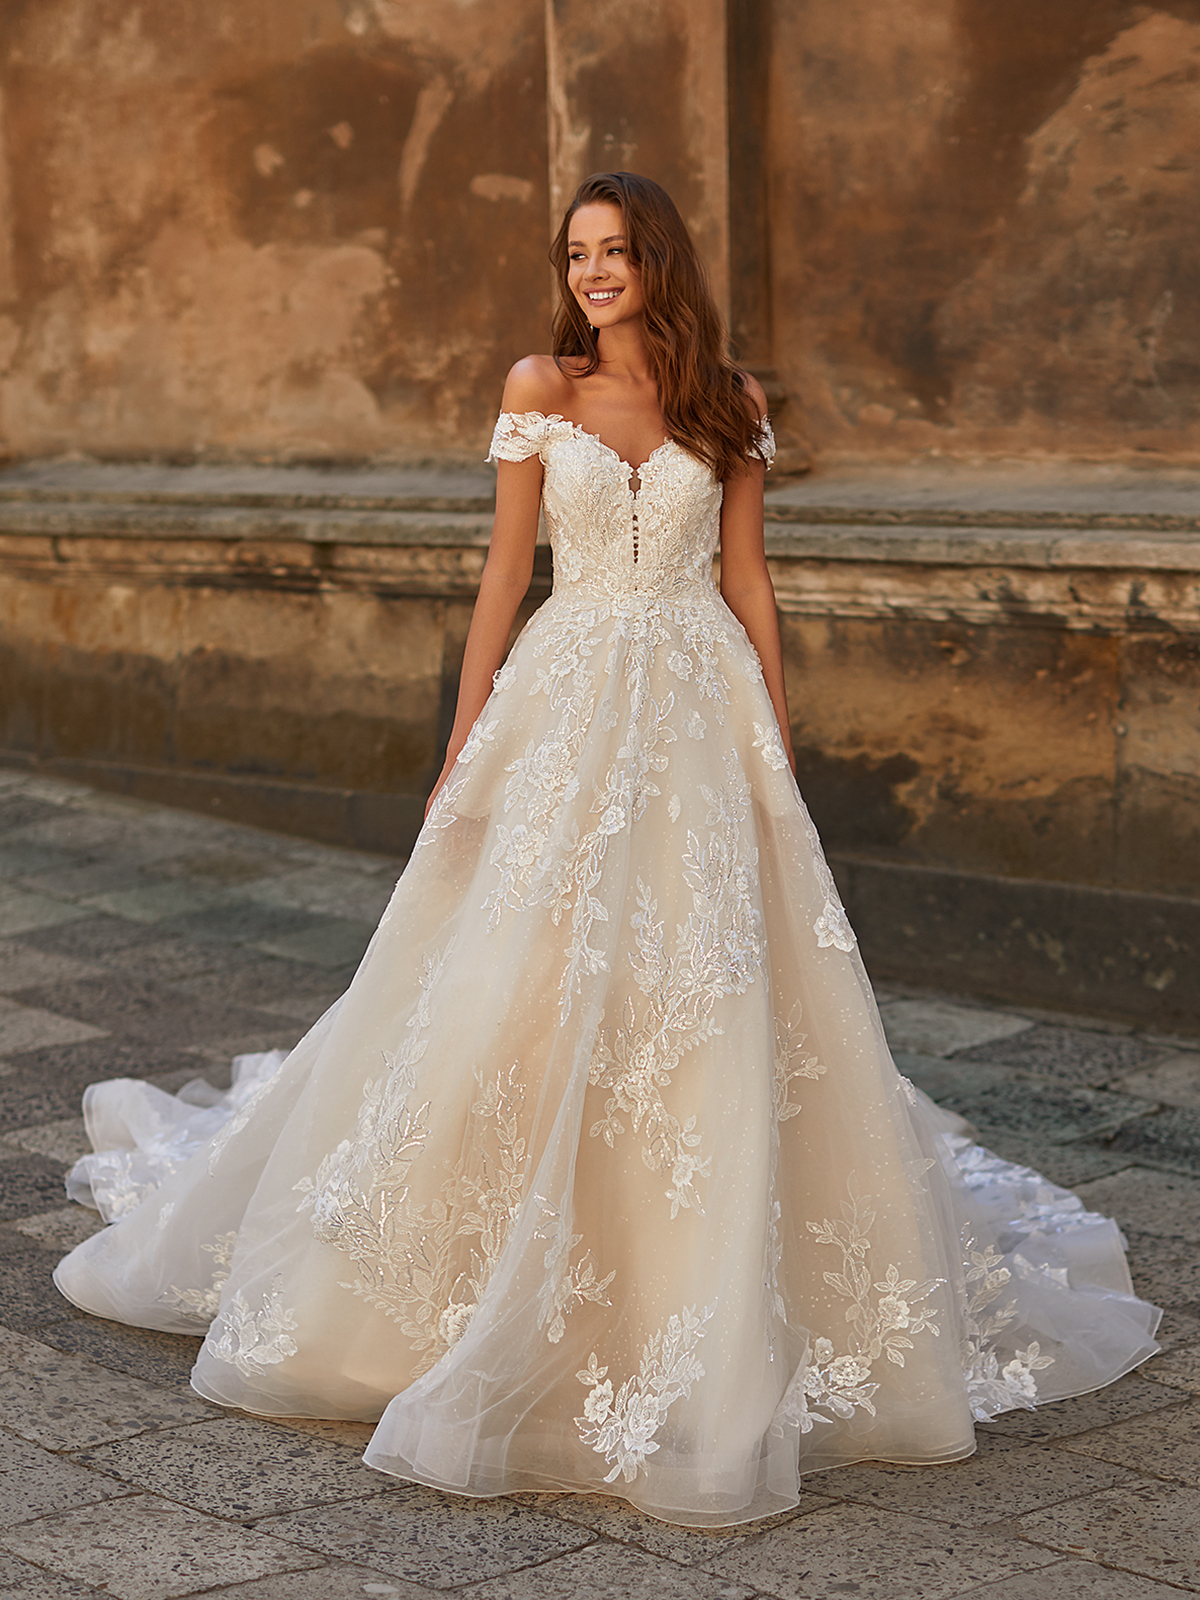 Bride walking outside in an A-line wedding dress with off-the-shoulder sleeves